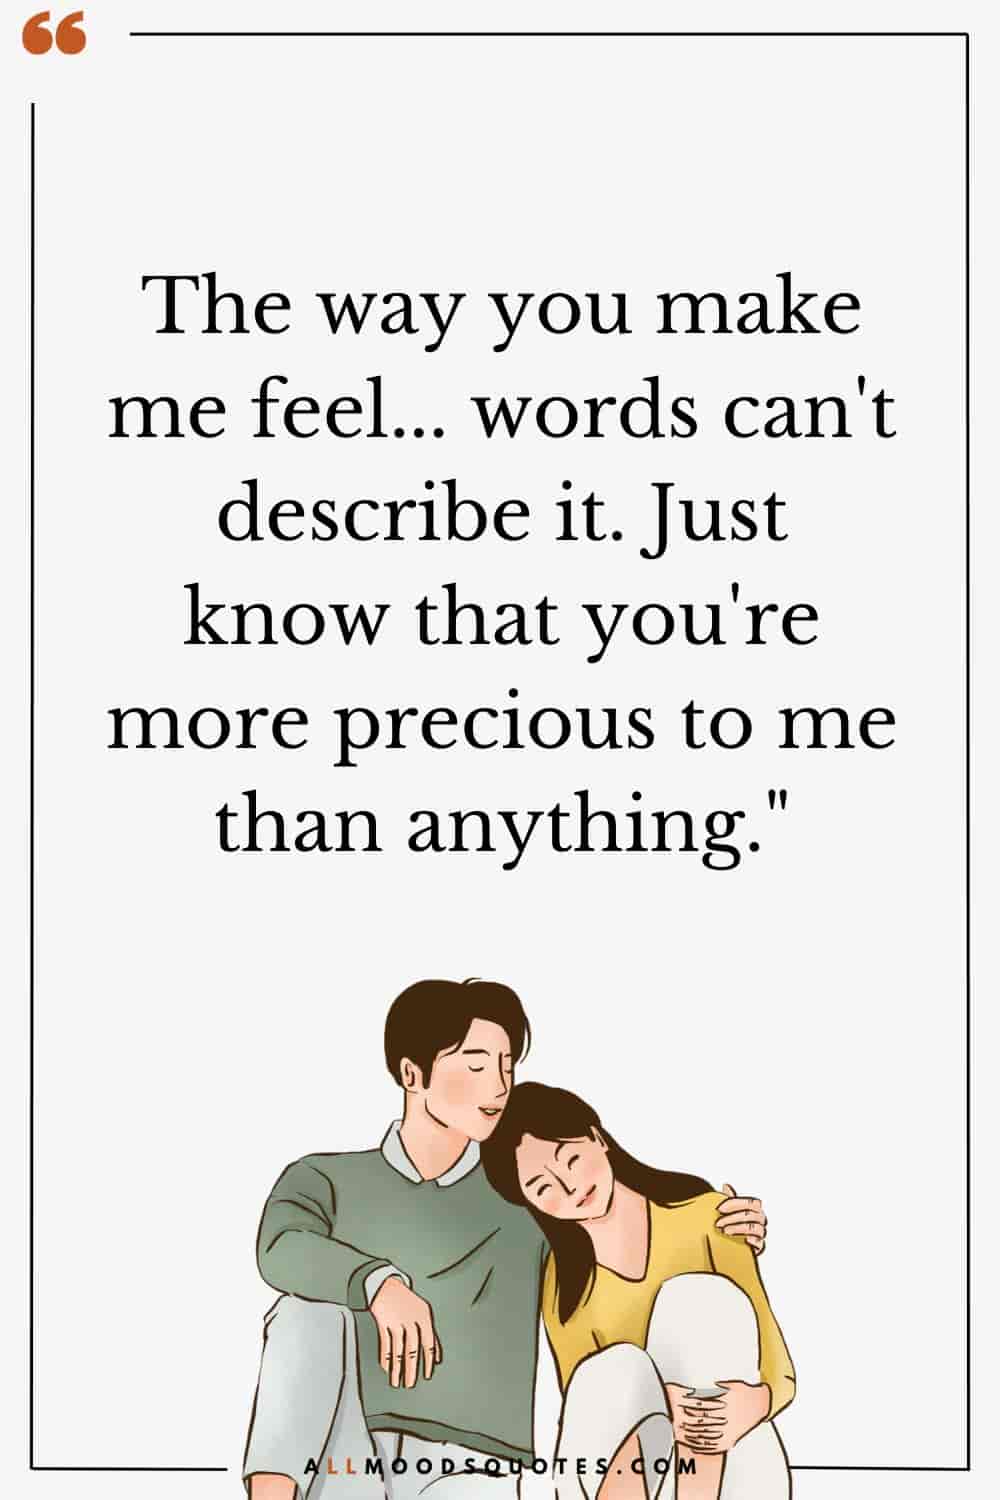 Short Touching Love Messages For Her To Make Her Cry